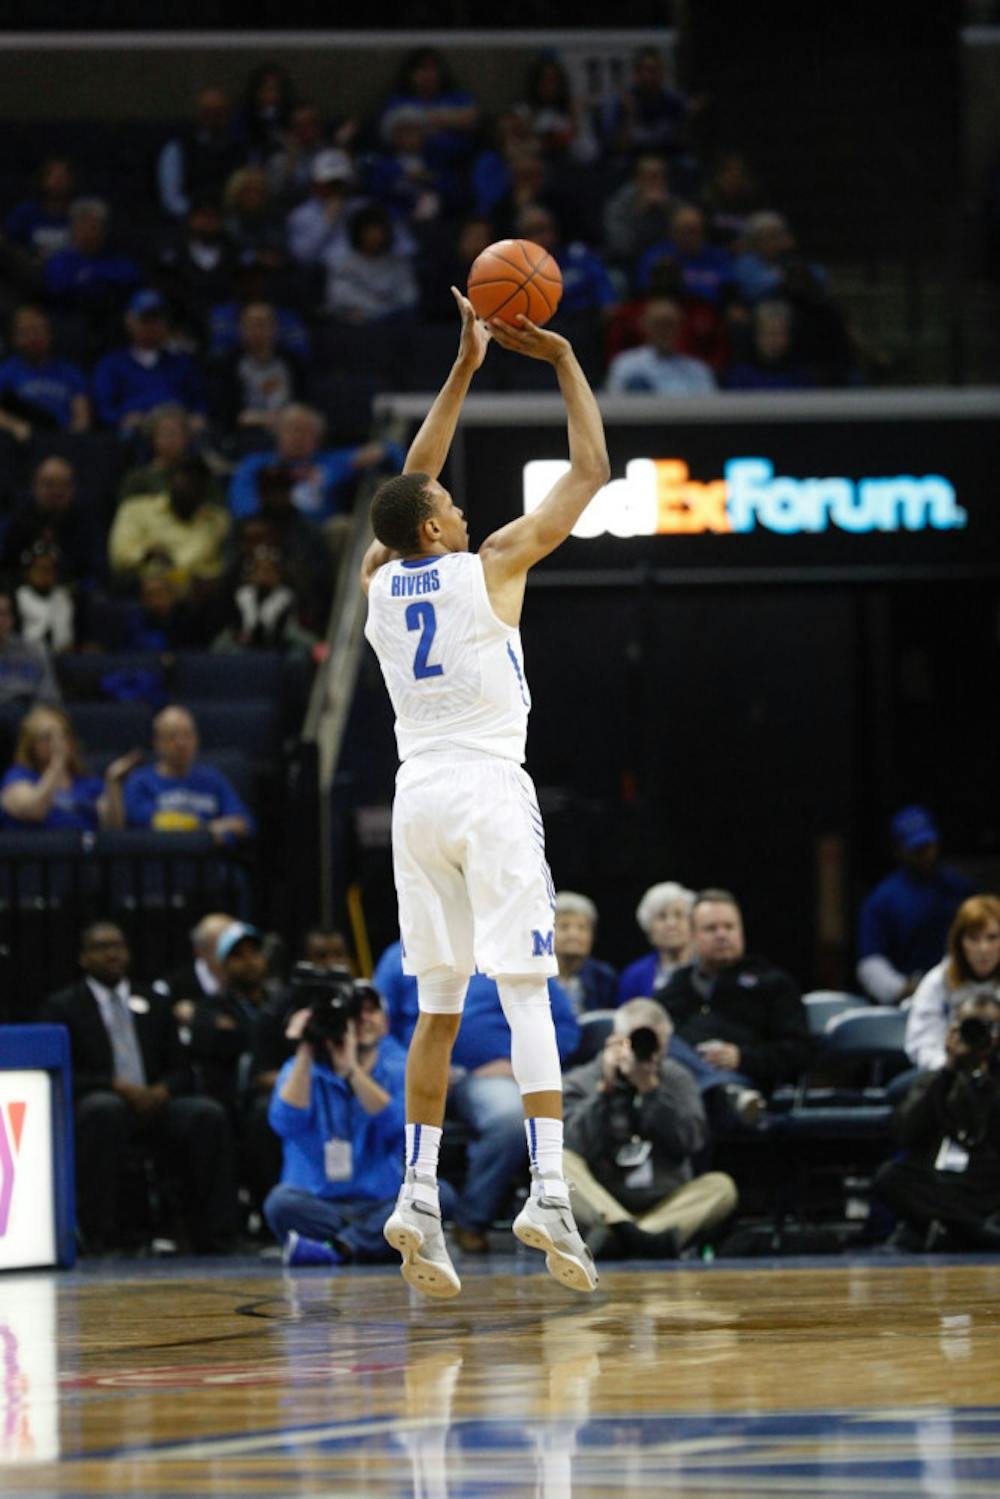 <p>Jimario Rivers takes the jump shot against ECU. He led the team with 15 points in the win.</p>